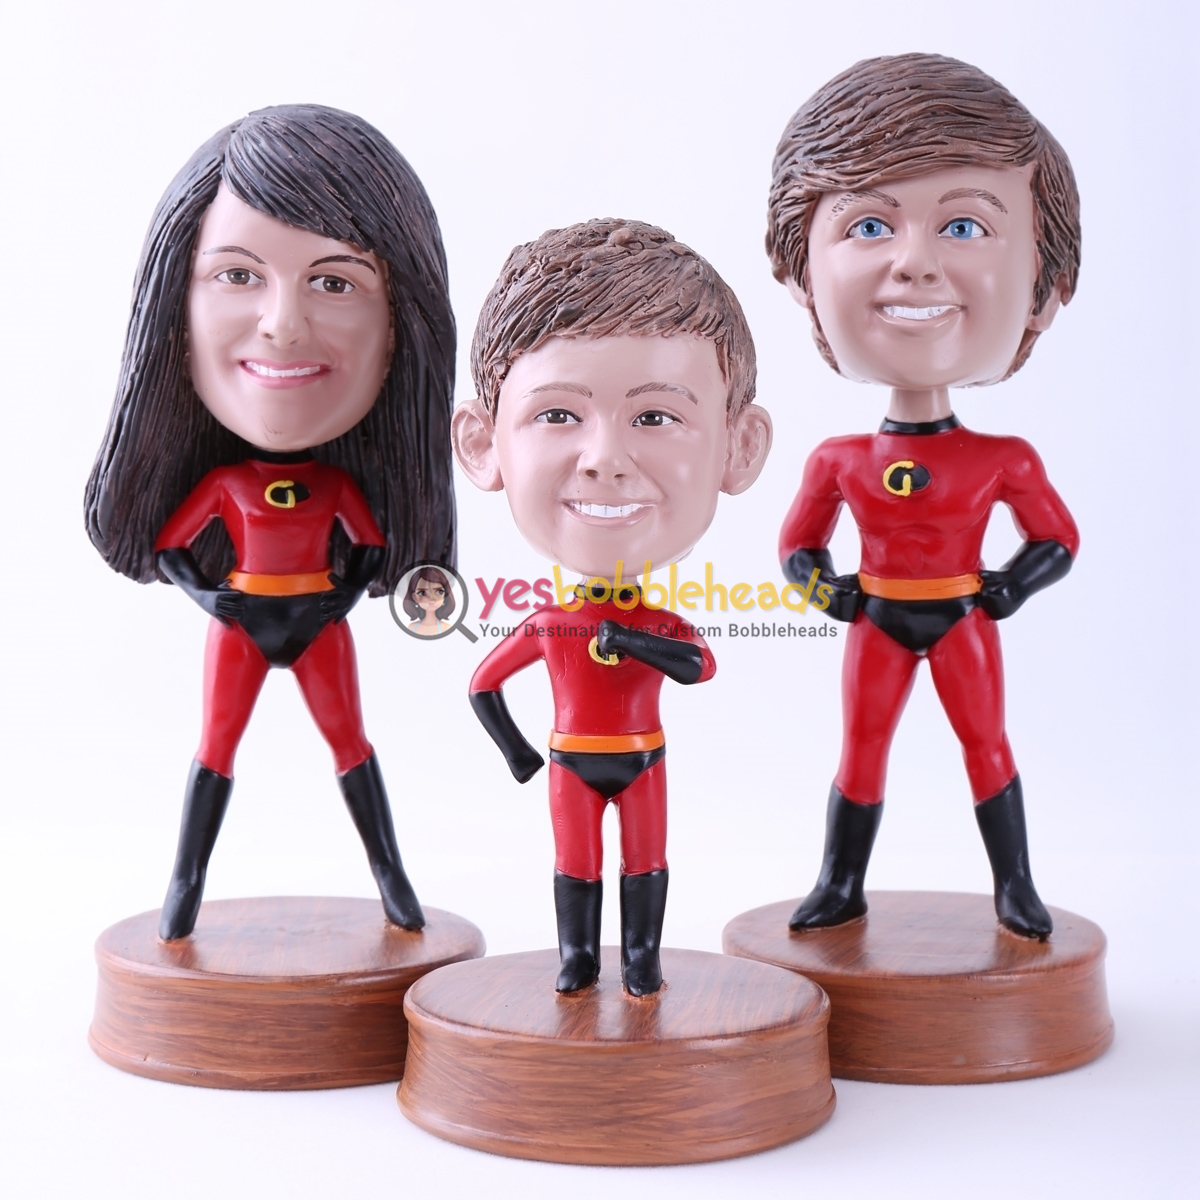 Picture of Custom Bobblehead Doll: Family of The Incredibles